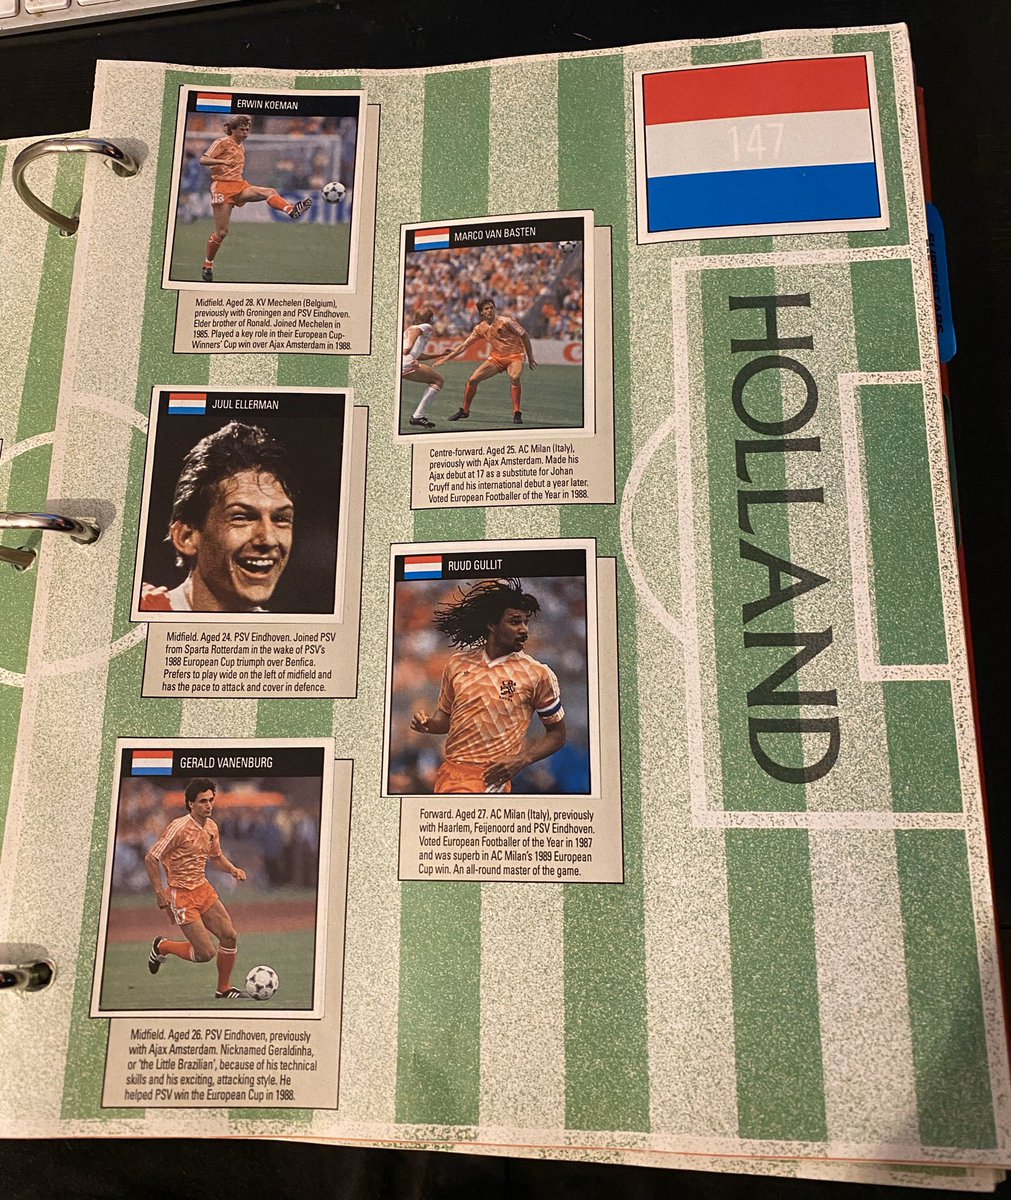 Holland, and the team I was convinced were going to win based on my eternal love for MvB